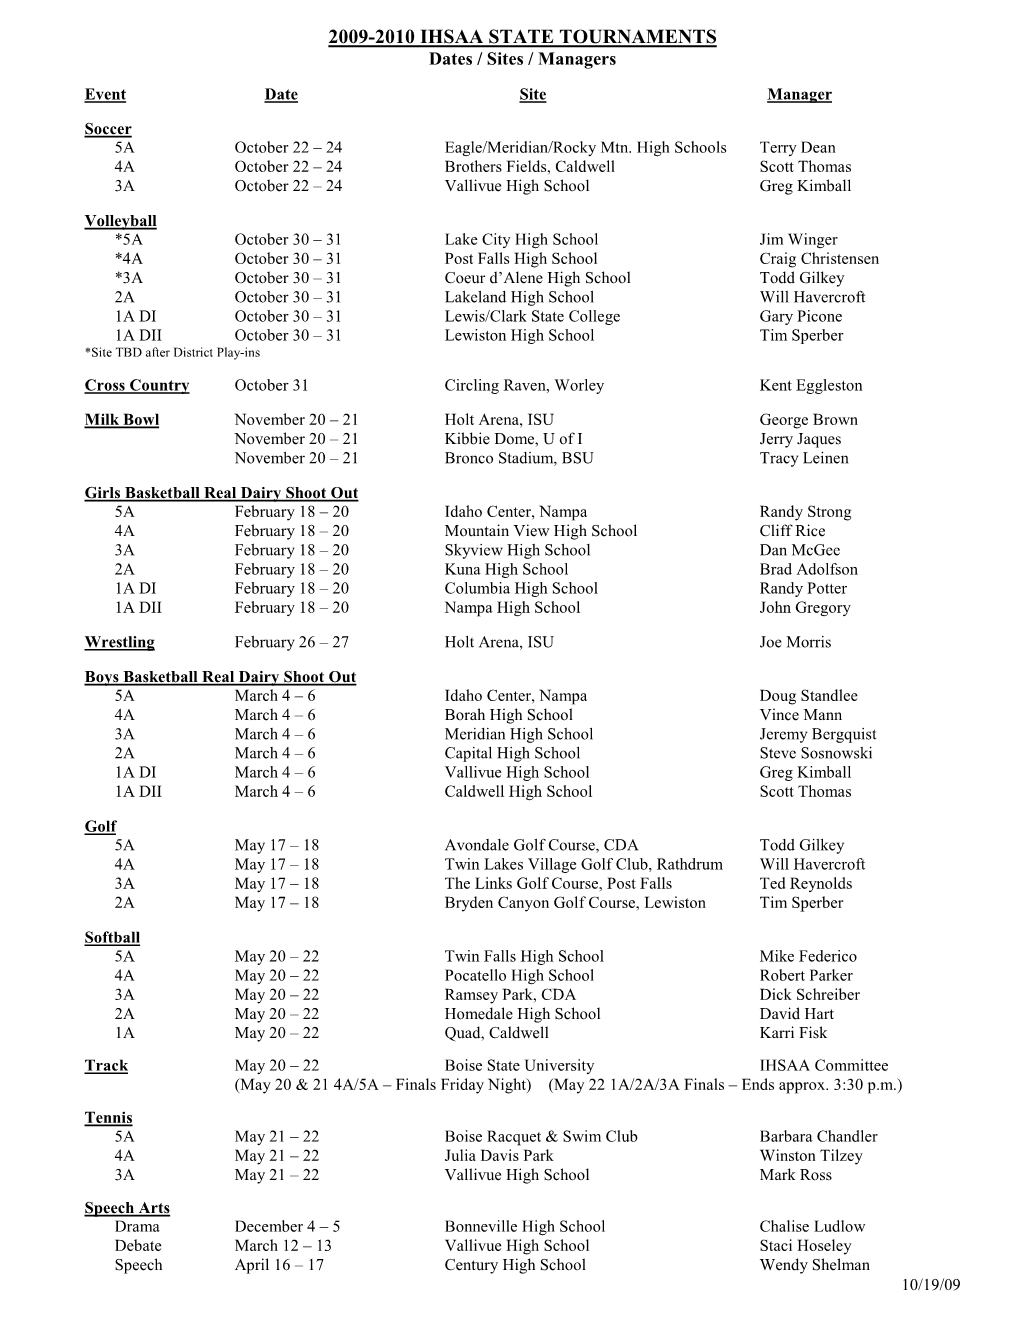 IHSAA STATE TOURNAMENTS Dates / Sites / Managers